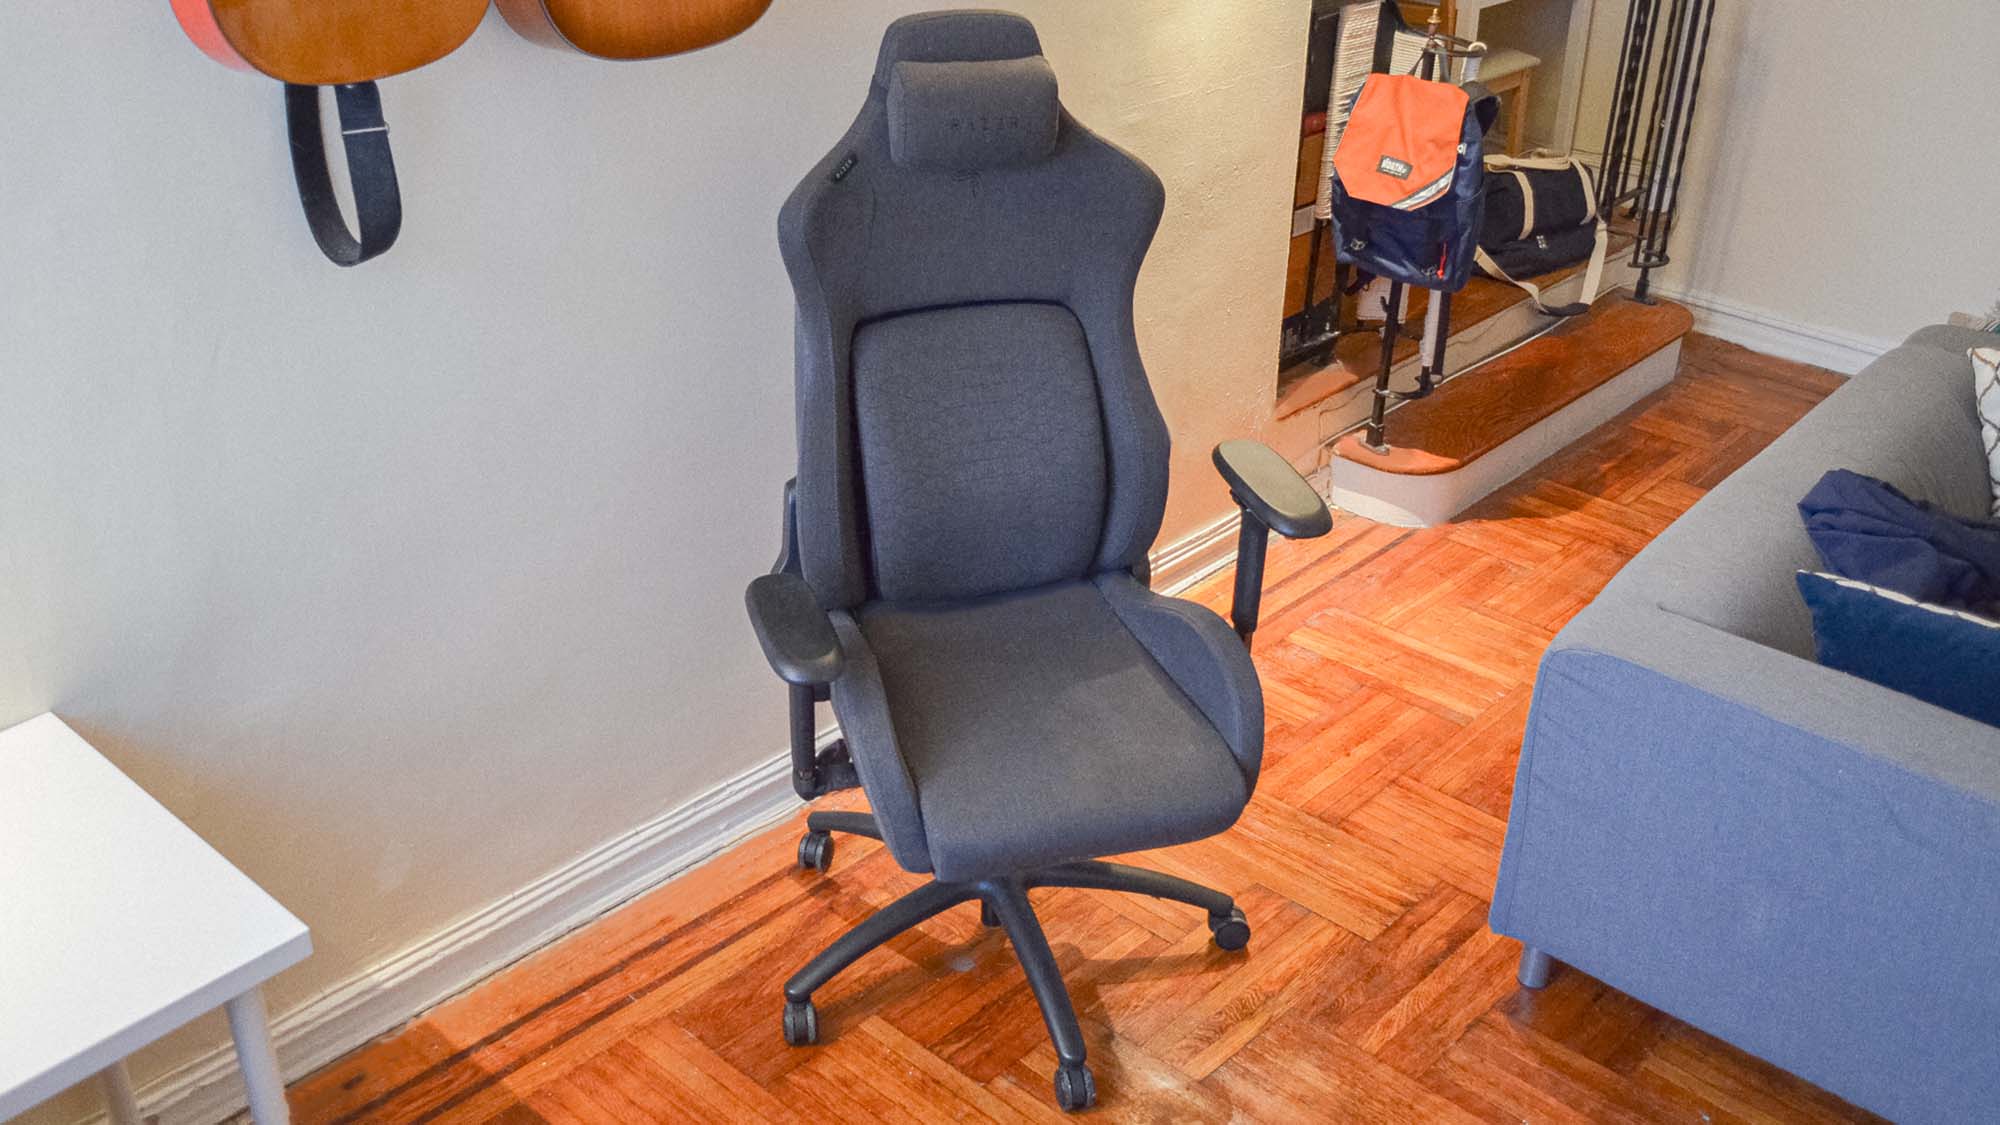 A Razer Iskur Fabric gaming chair in a living room